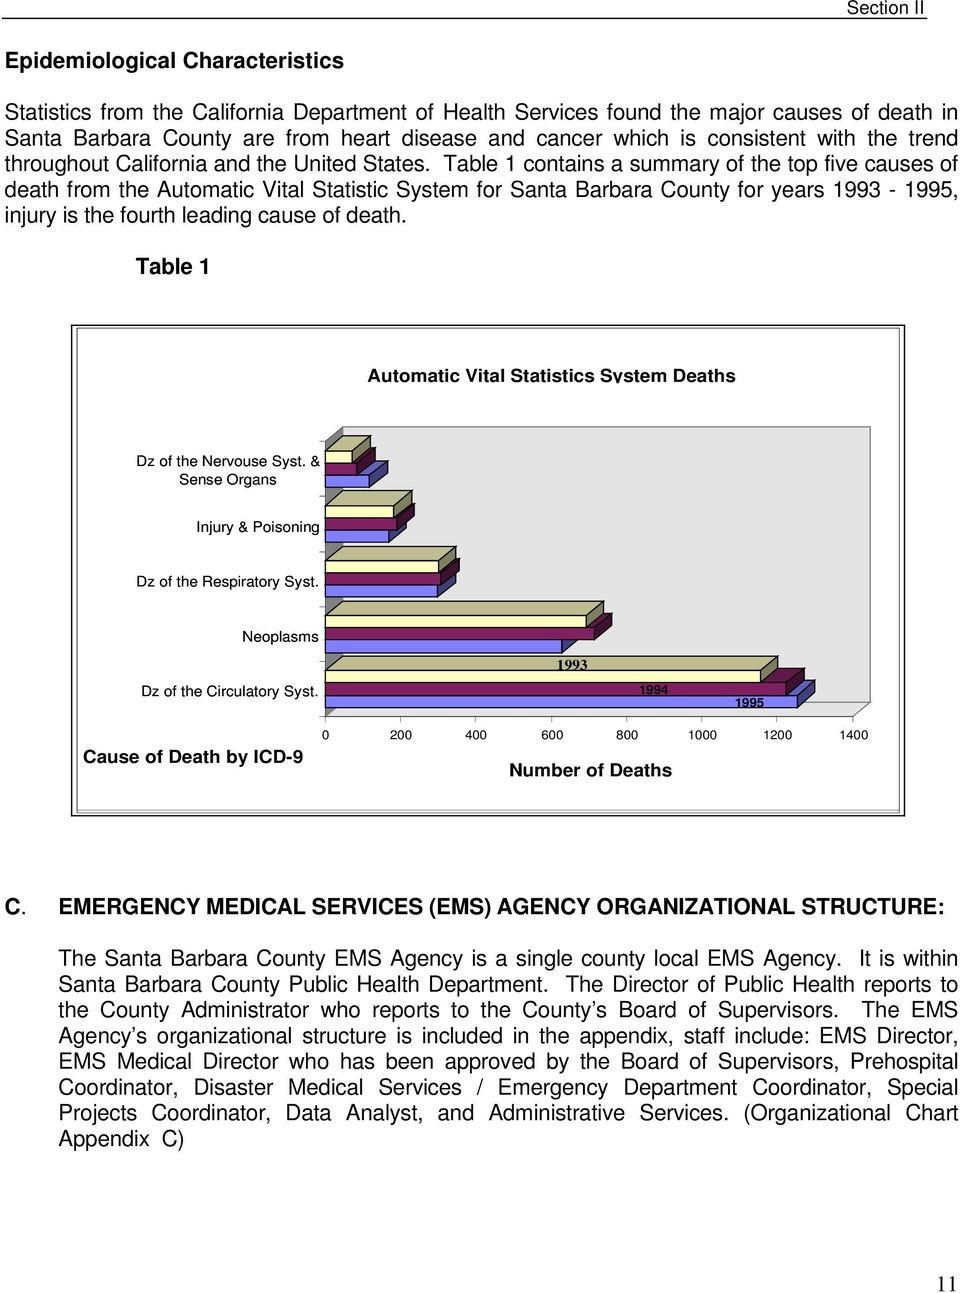 Table 1 contains a summary of the top five causes of death from the Automatic Vital Statistic System for Santa Barbara County for years 1993-1995, injury is the fourth leading cause of death.